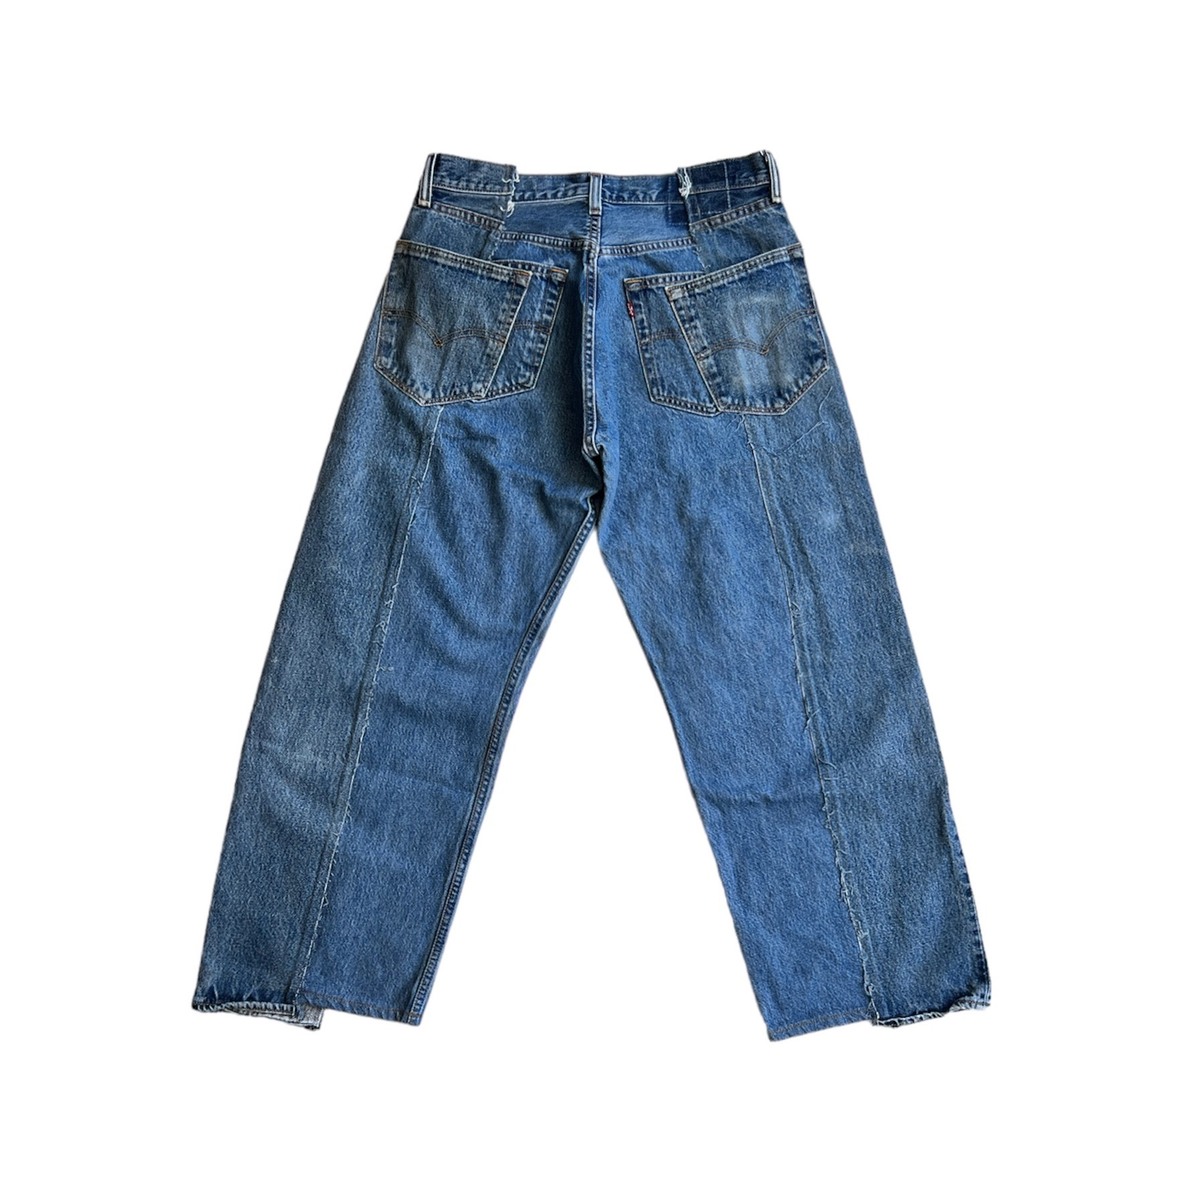 OLDPARK baggy jeans blue-M - 画像4枚目